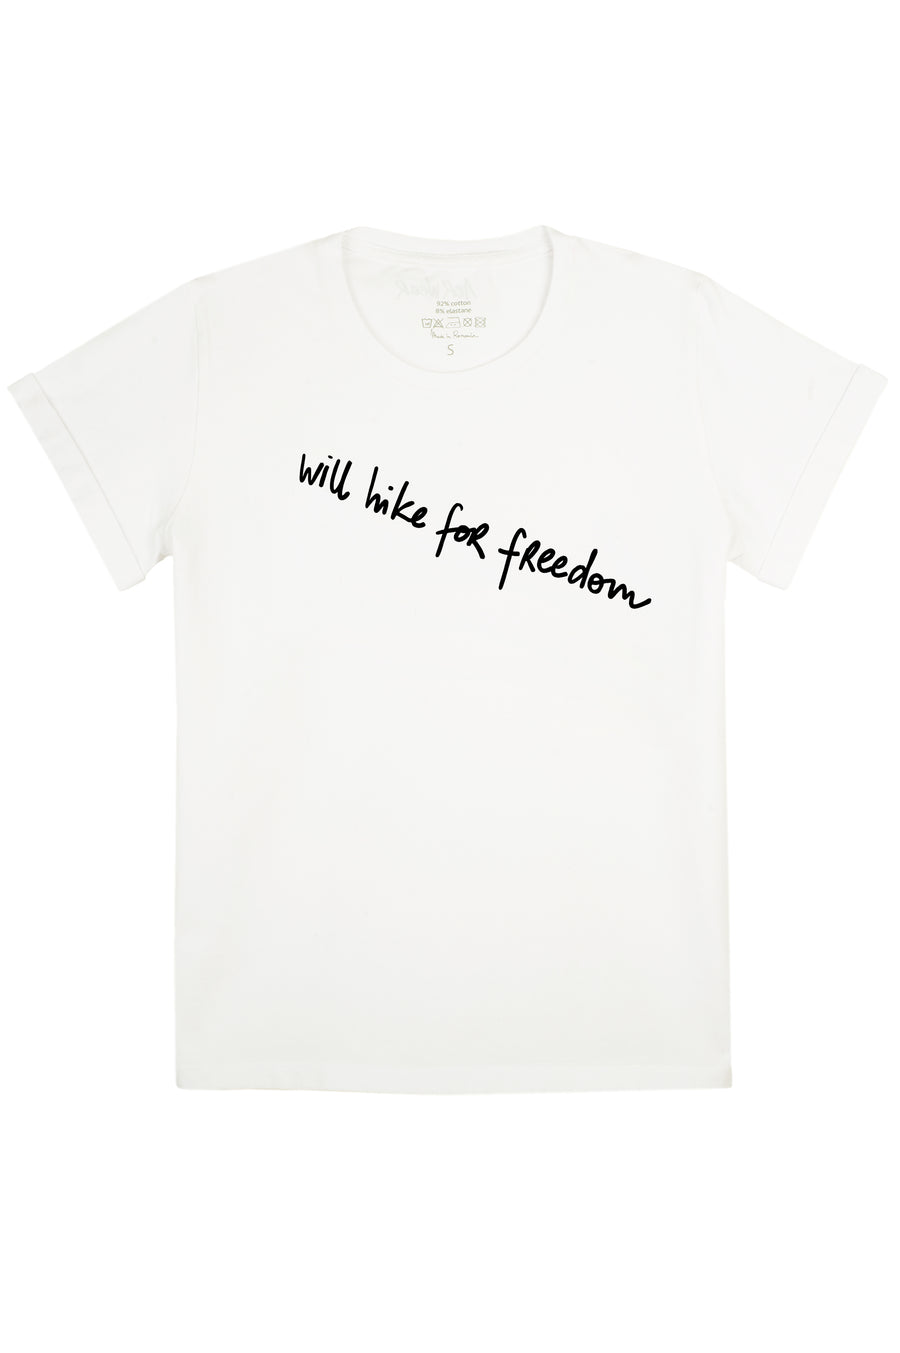 WILL HIKE FOR FREEDOM T-shirt